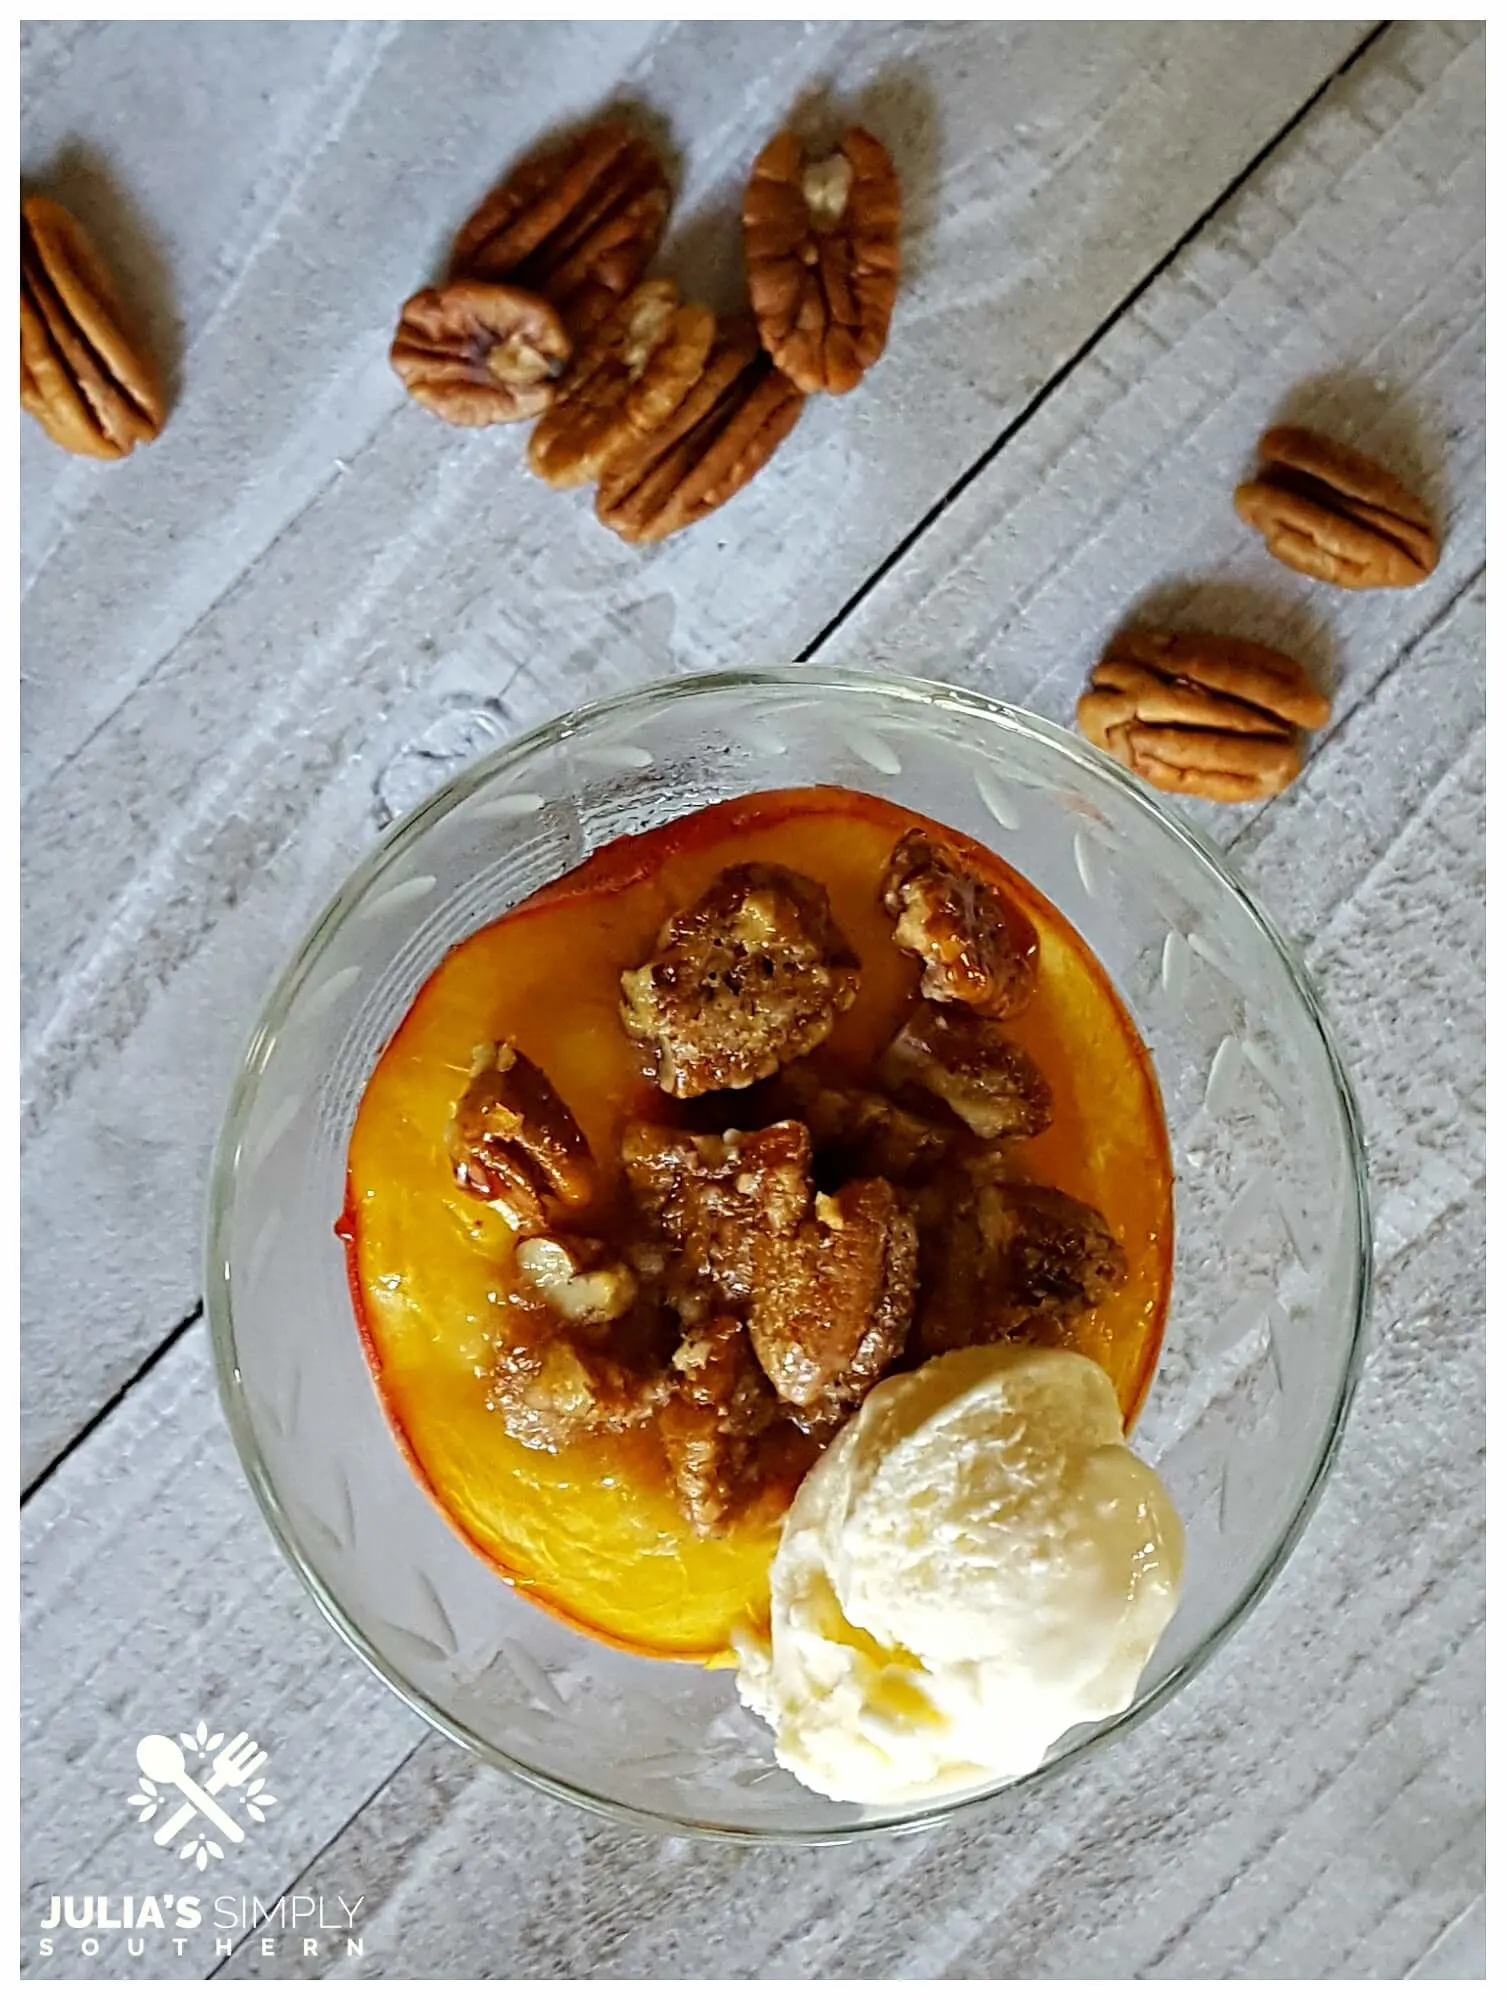 Fresh bourbon peaches baked dessert with ice cream and pecans